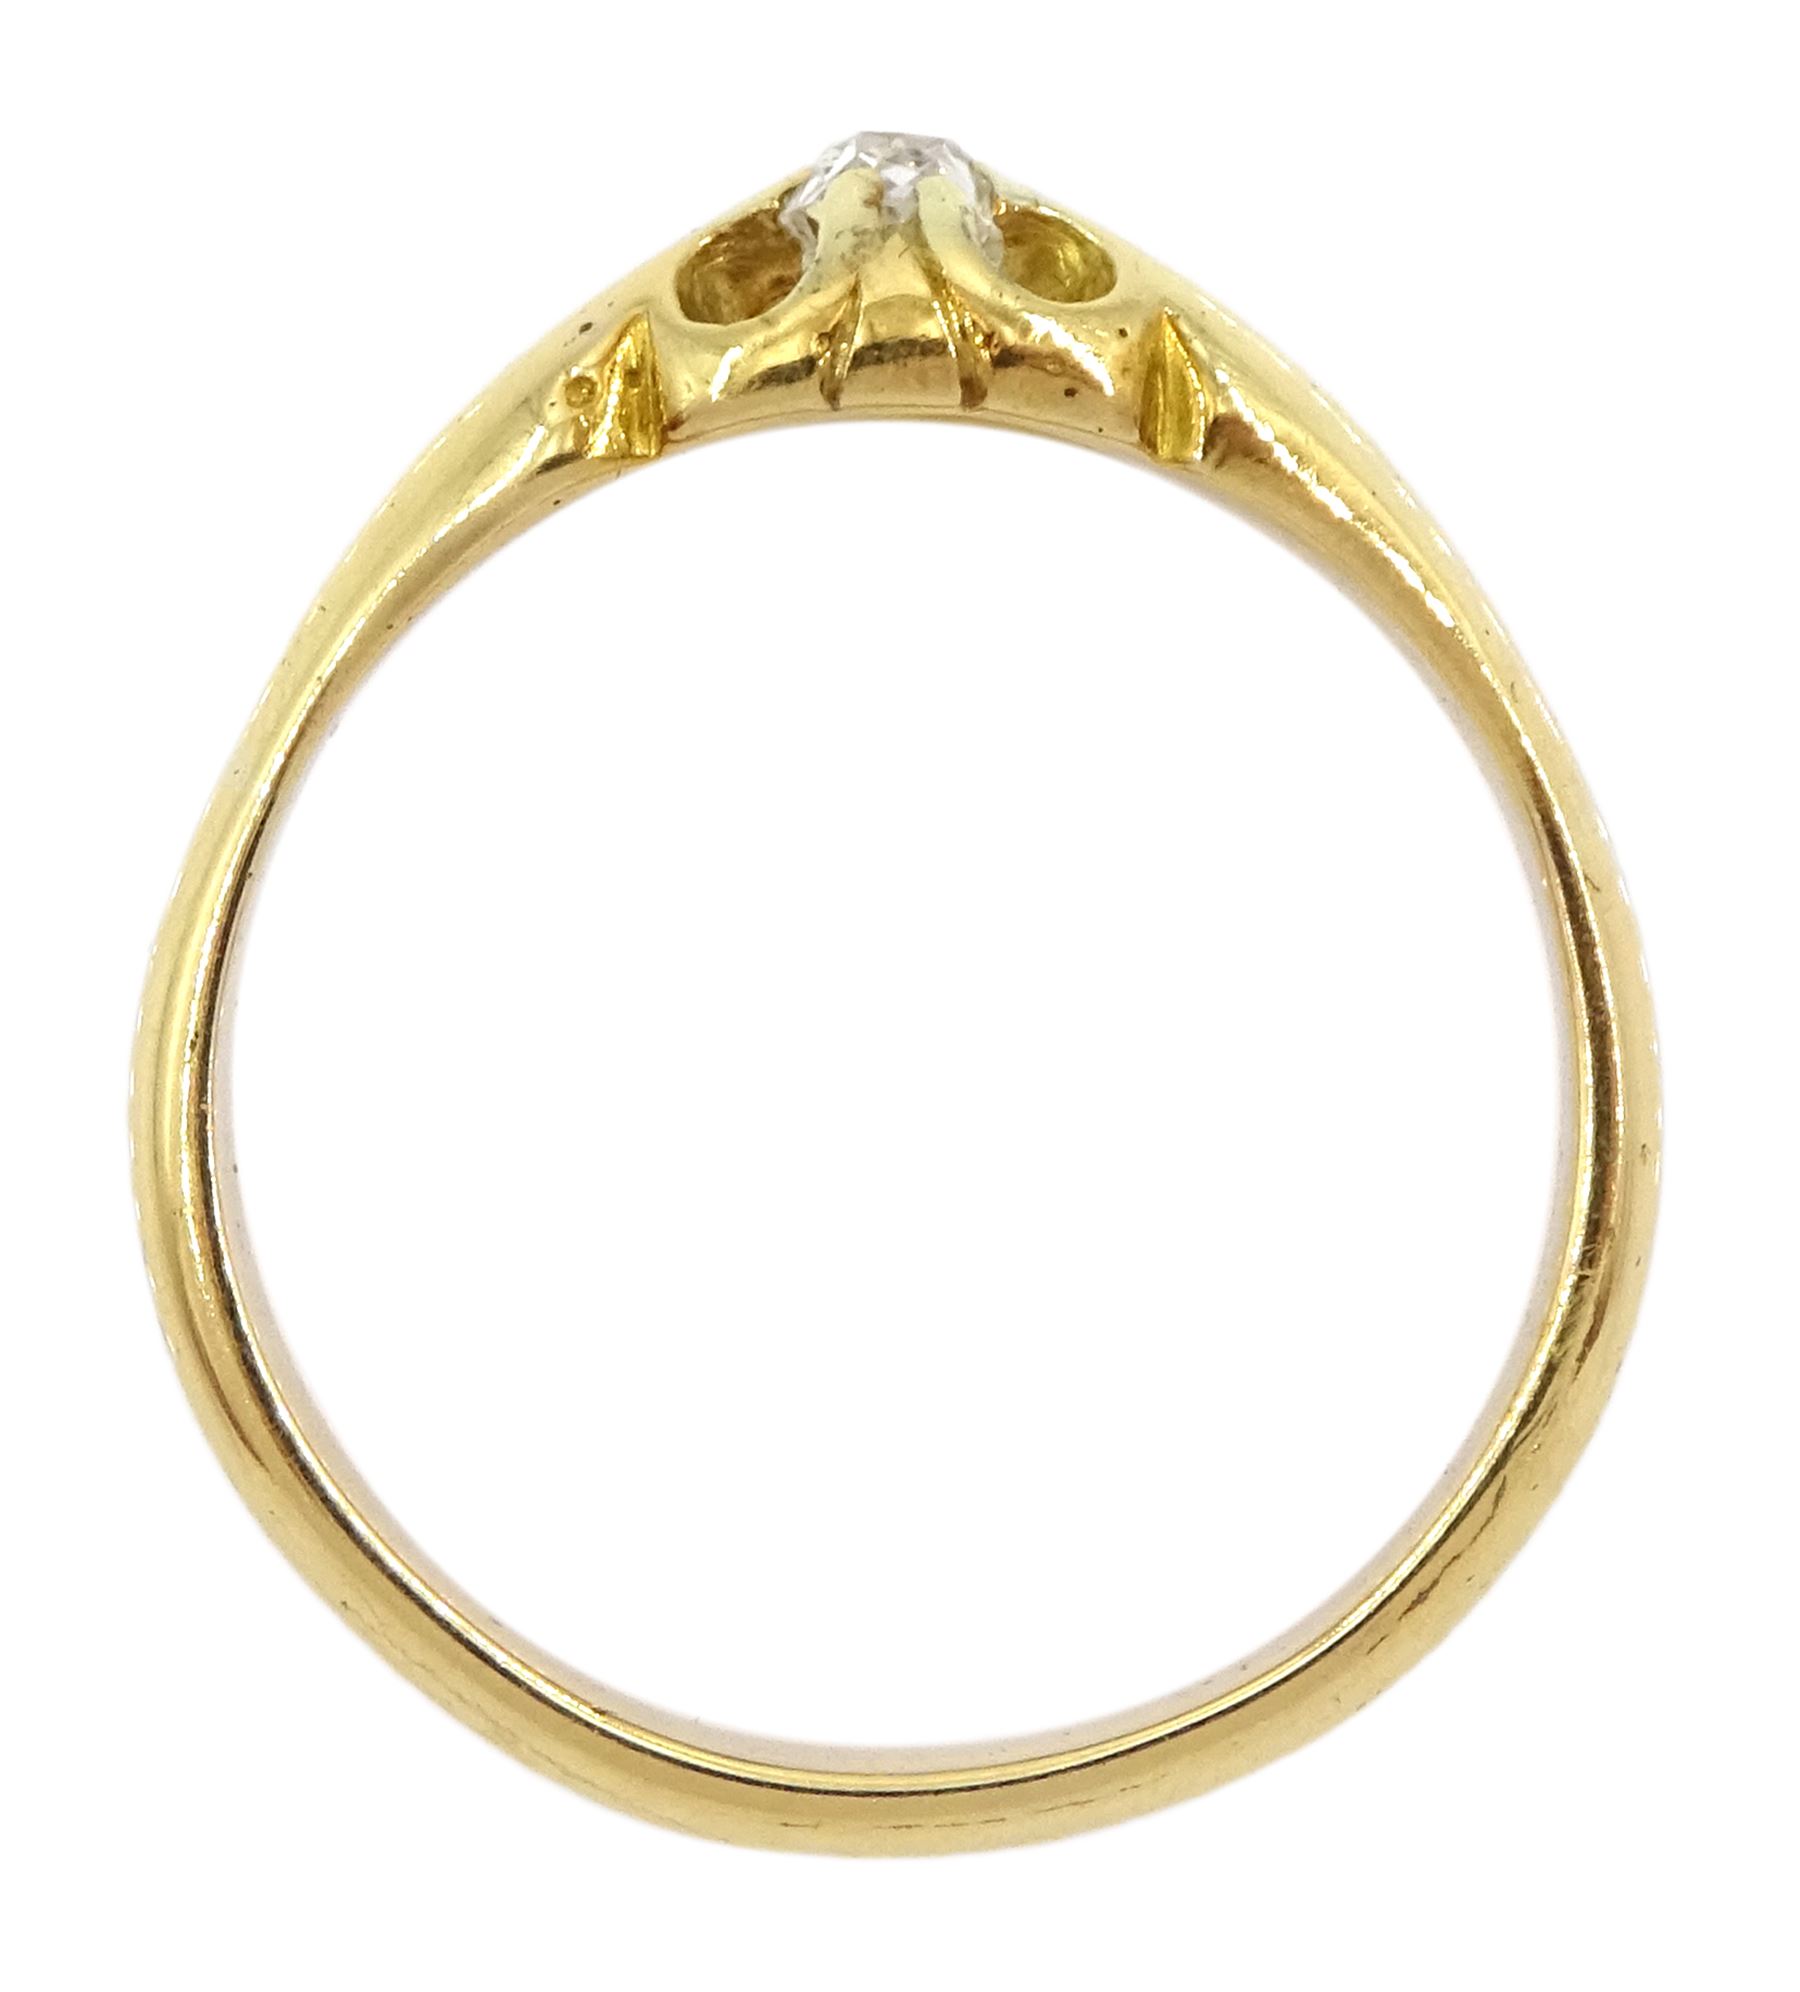 Early 20th century 18ct gold single stone old cut diamond ring - Image 4 of 4